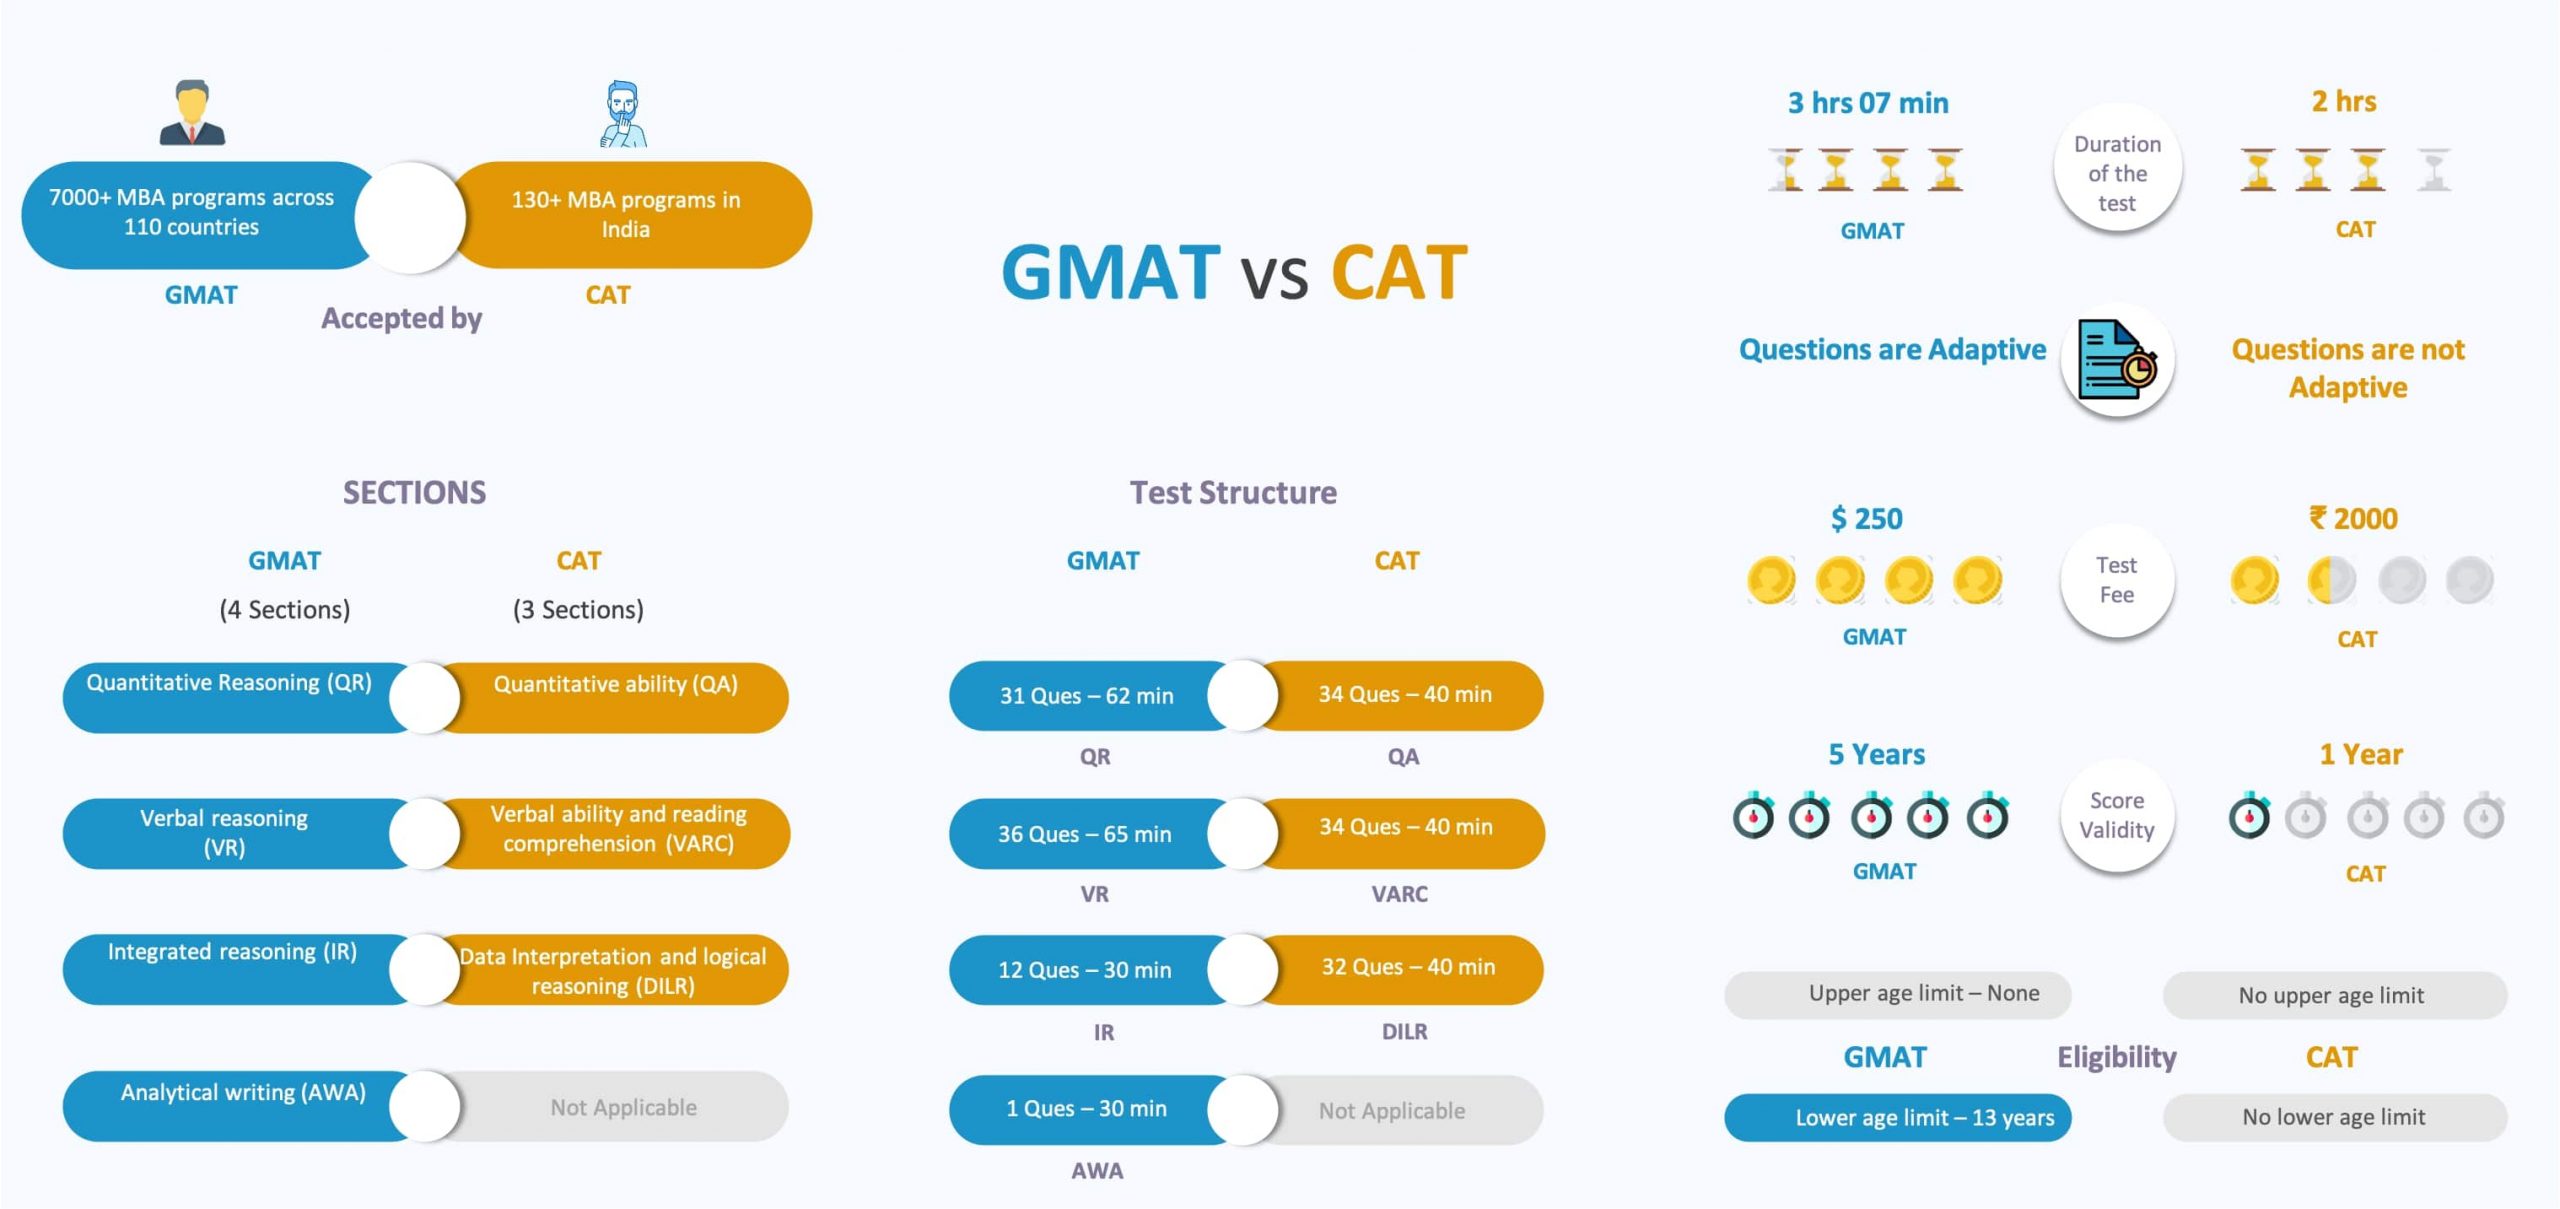 GMAT vs CAT: Key differences on eligibility, syllabus, format, difficulty, validity